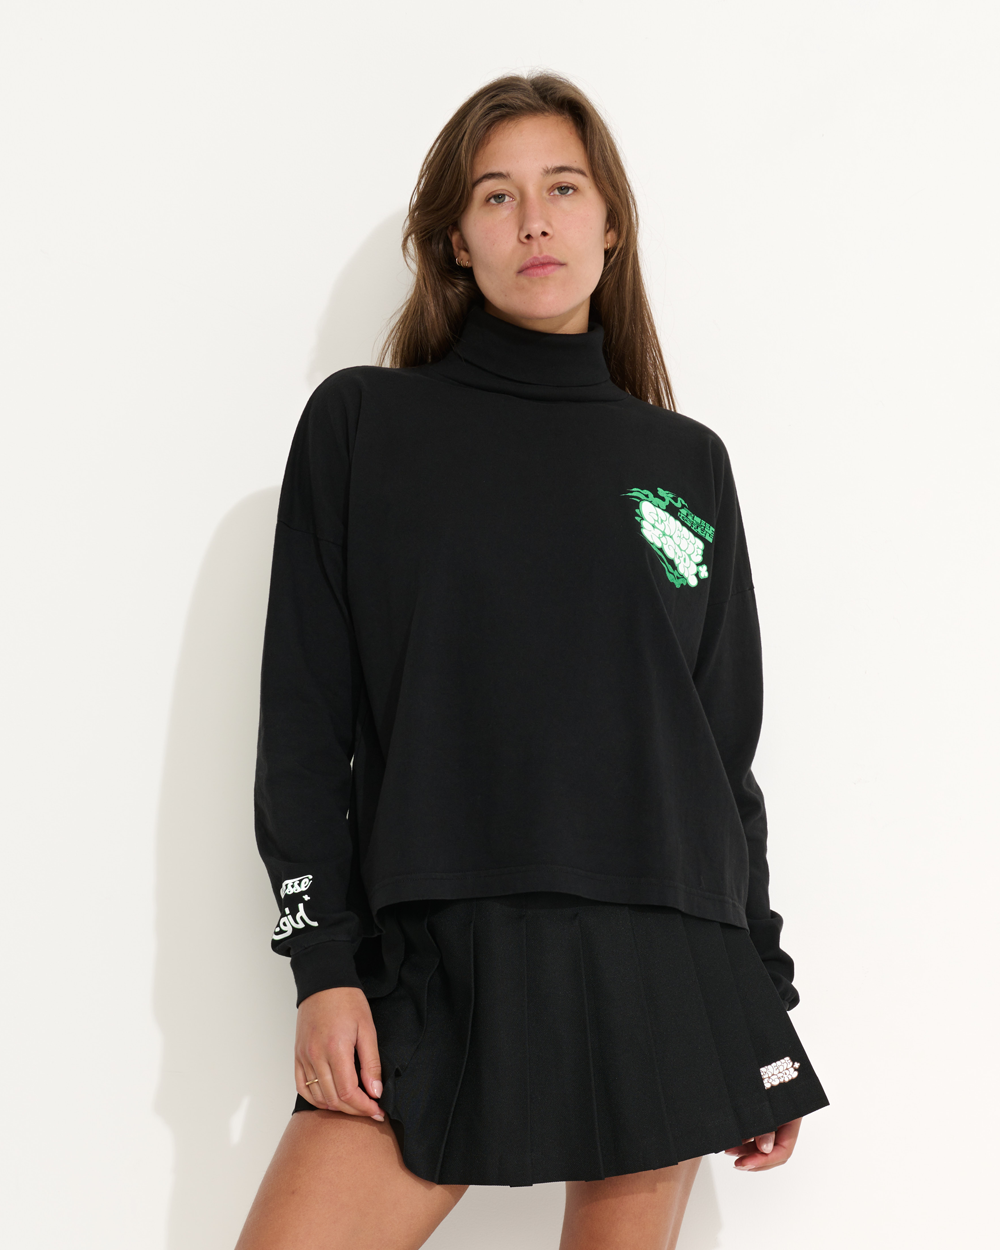 Finesse x X-Girl Long Sleeve Turtle Neck Black 1411GD-BLK